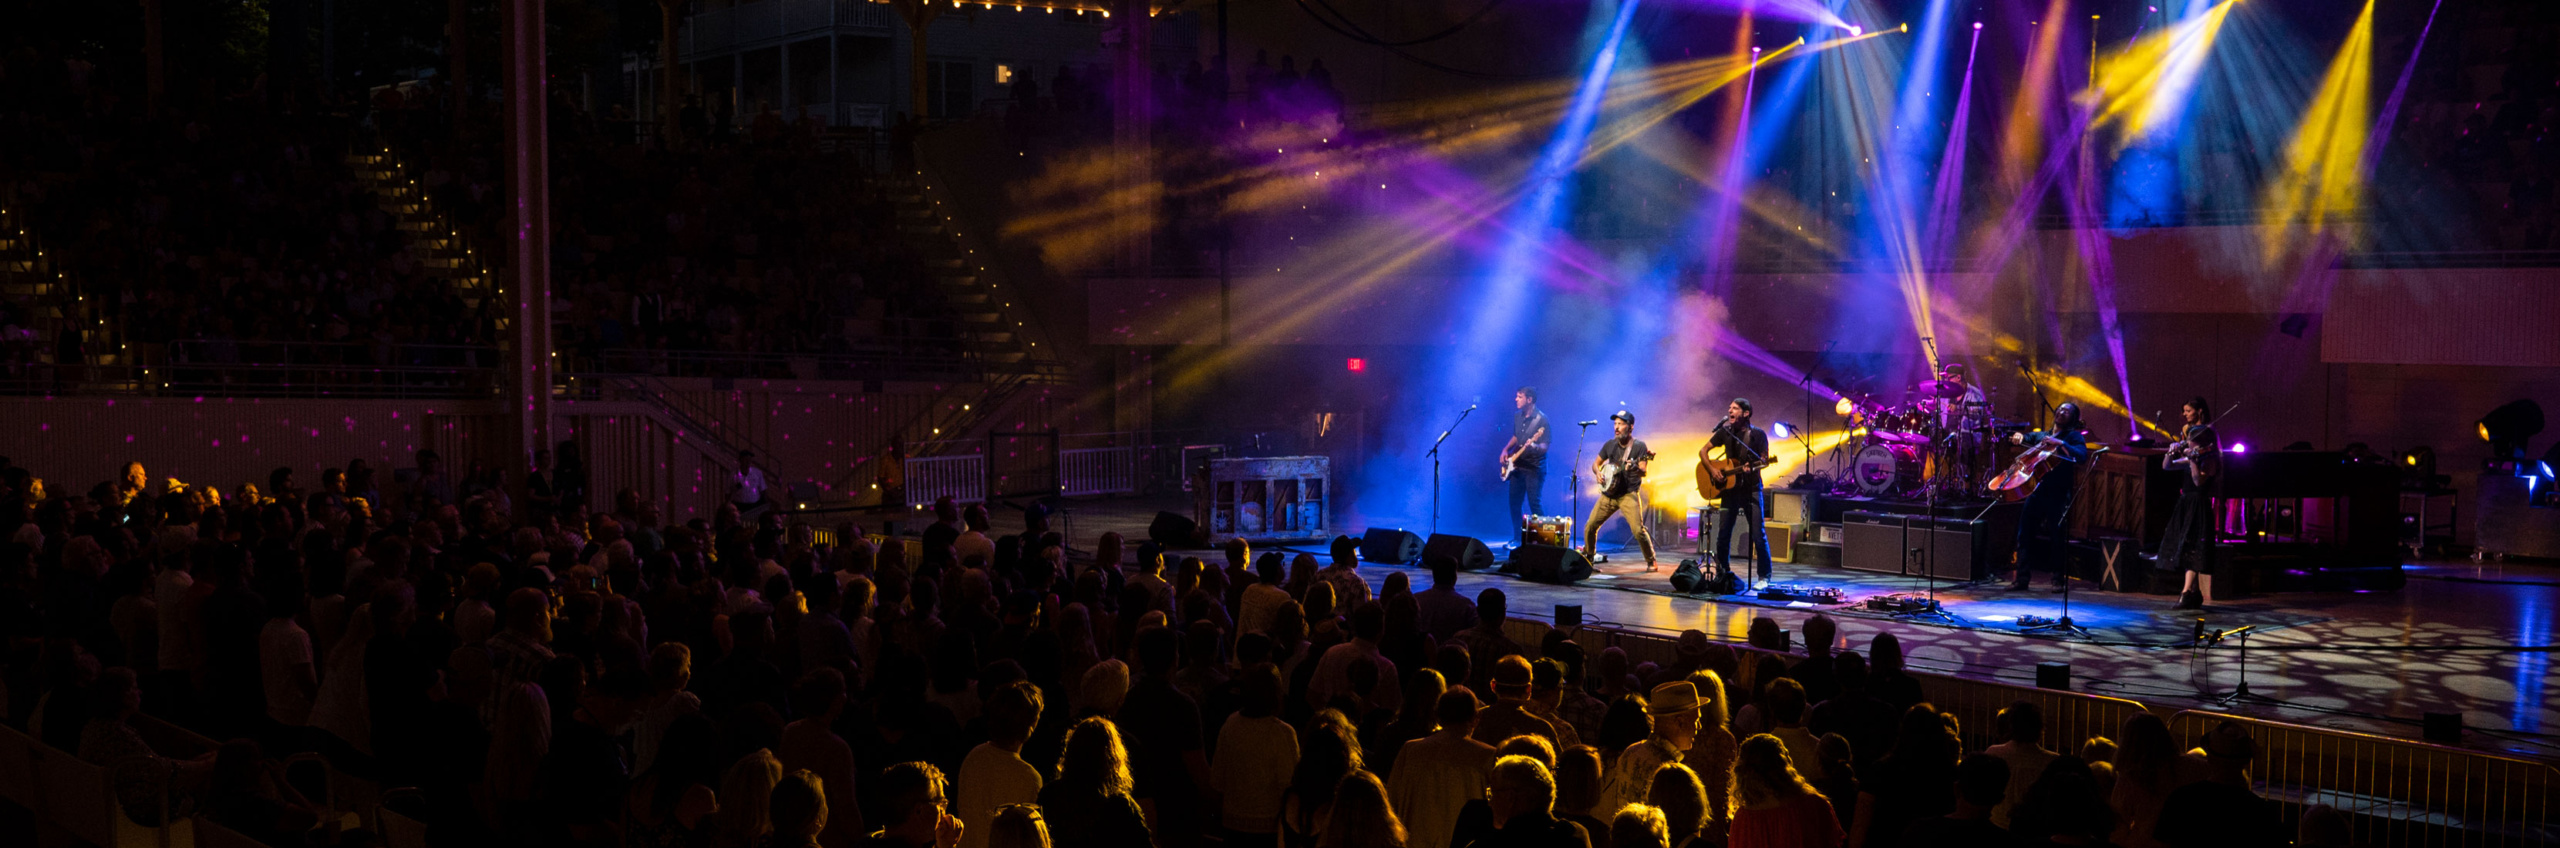 The Avett Brothers performing in the Amphitheater